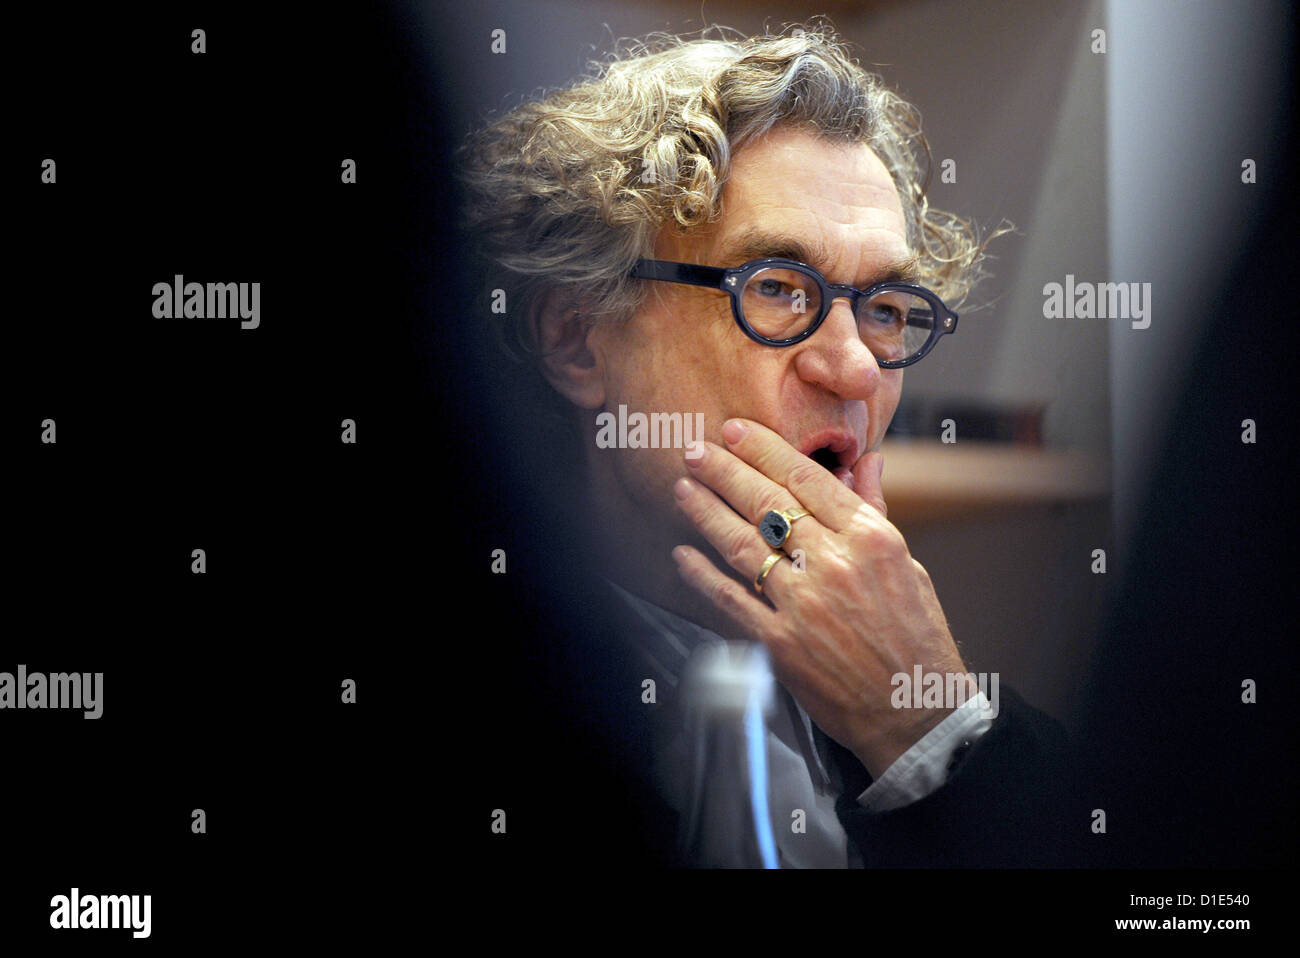 Film director Wim Wenders speaks at the press conference in Duesseldorf, Germany, 14 December 2012. The director introduced his new Wim Wenders Foundation. The foundation should archive and research the complete works of Wenders. Photo: Daniel Naupold Stock Photo